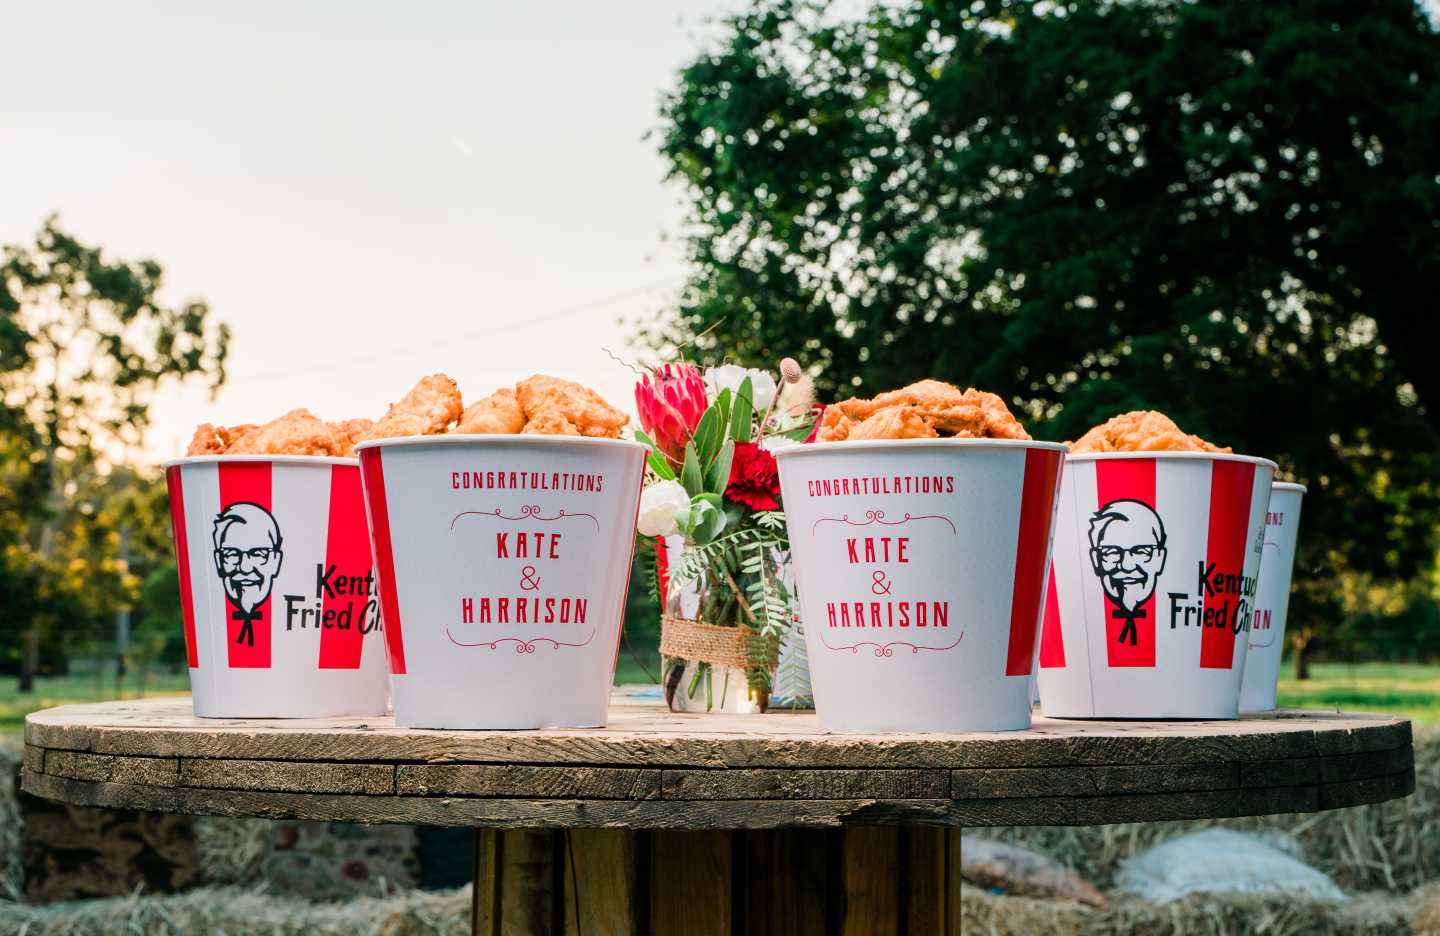 TOOWOOMBA COUPLE OFFICIALLY ‘PUT A WING ON IT’ THROUGH KFC’S  WEDDING SERVICE